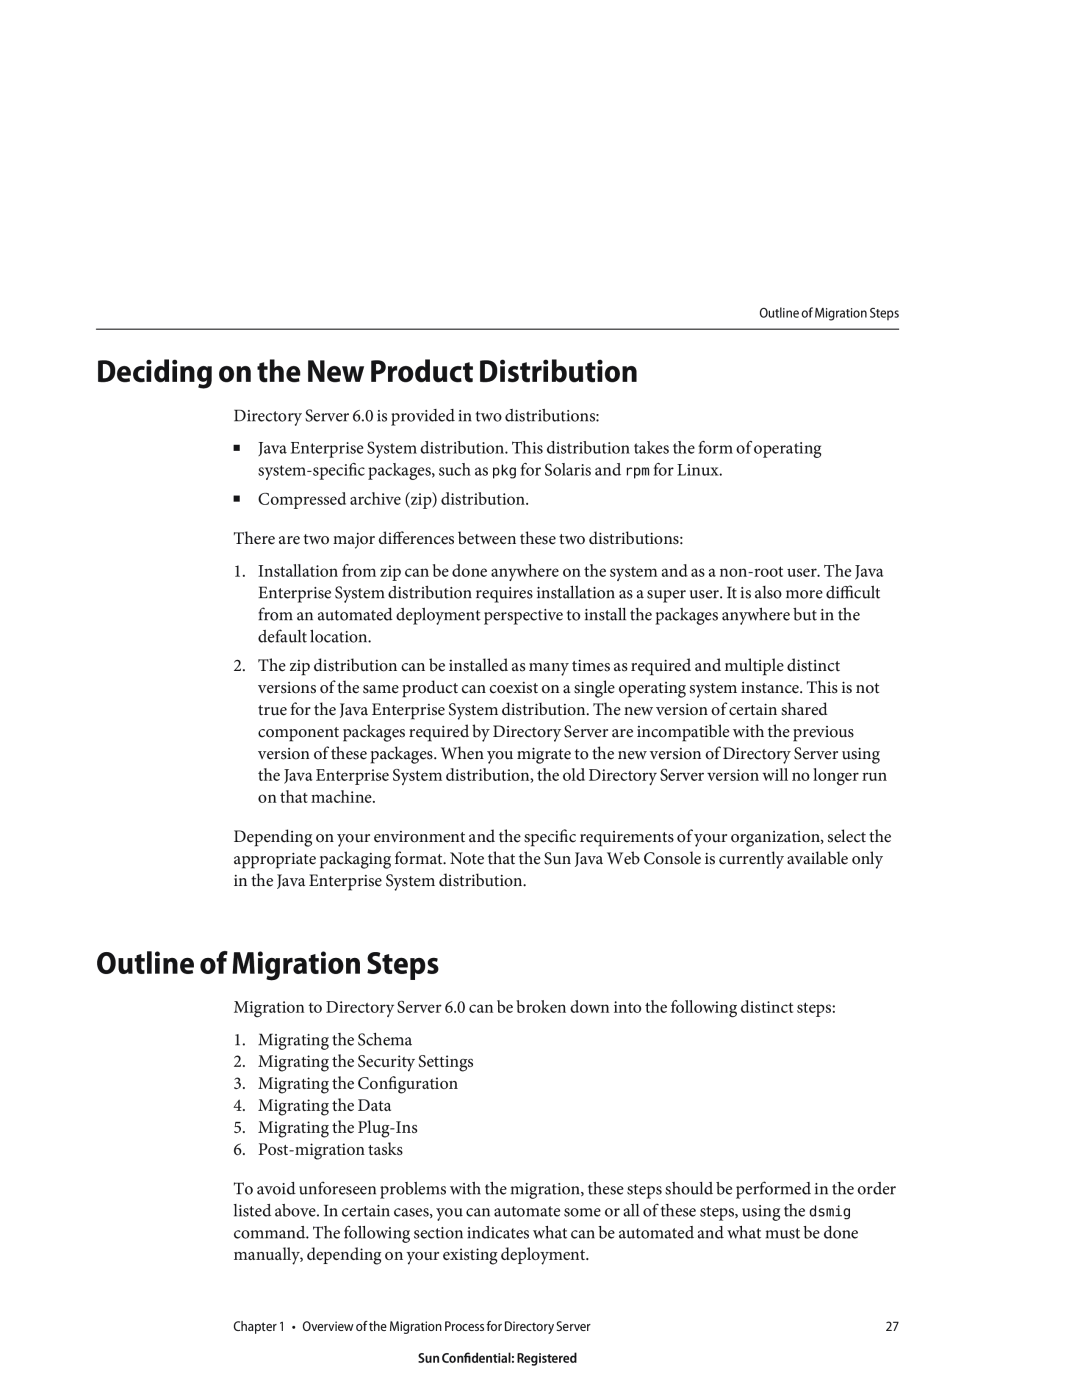 Sun Microsystems 8190994 manual Deciding on the New Product Distribution, Outline of Migration Steps 